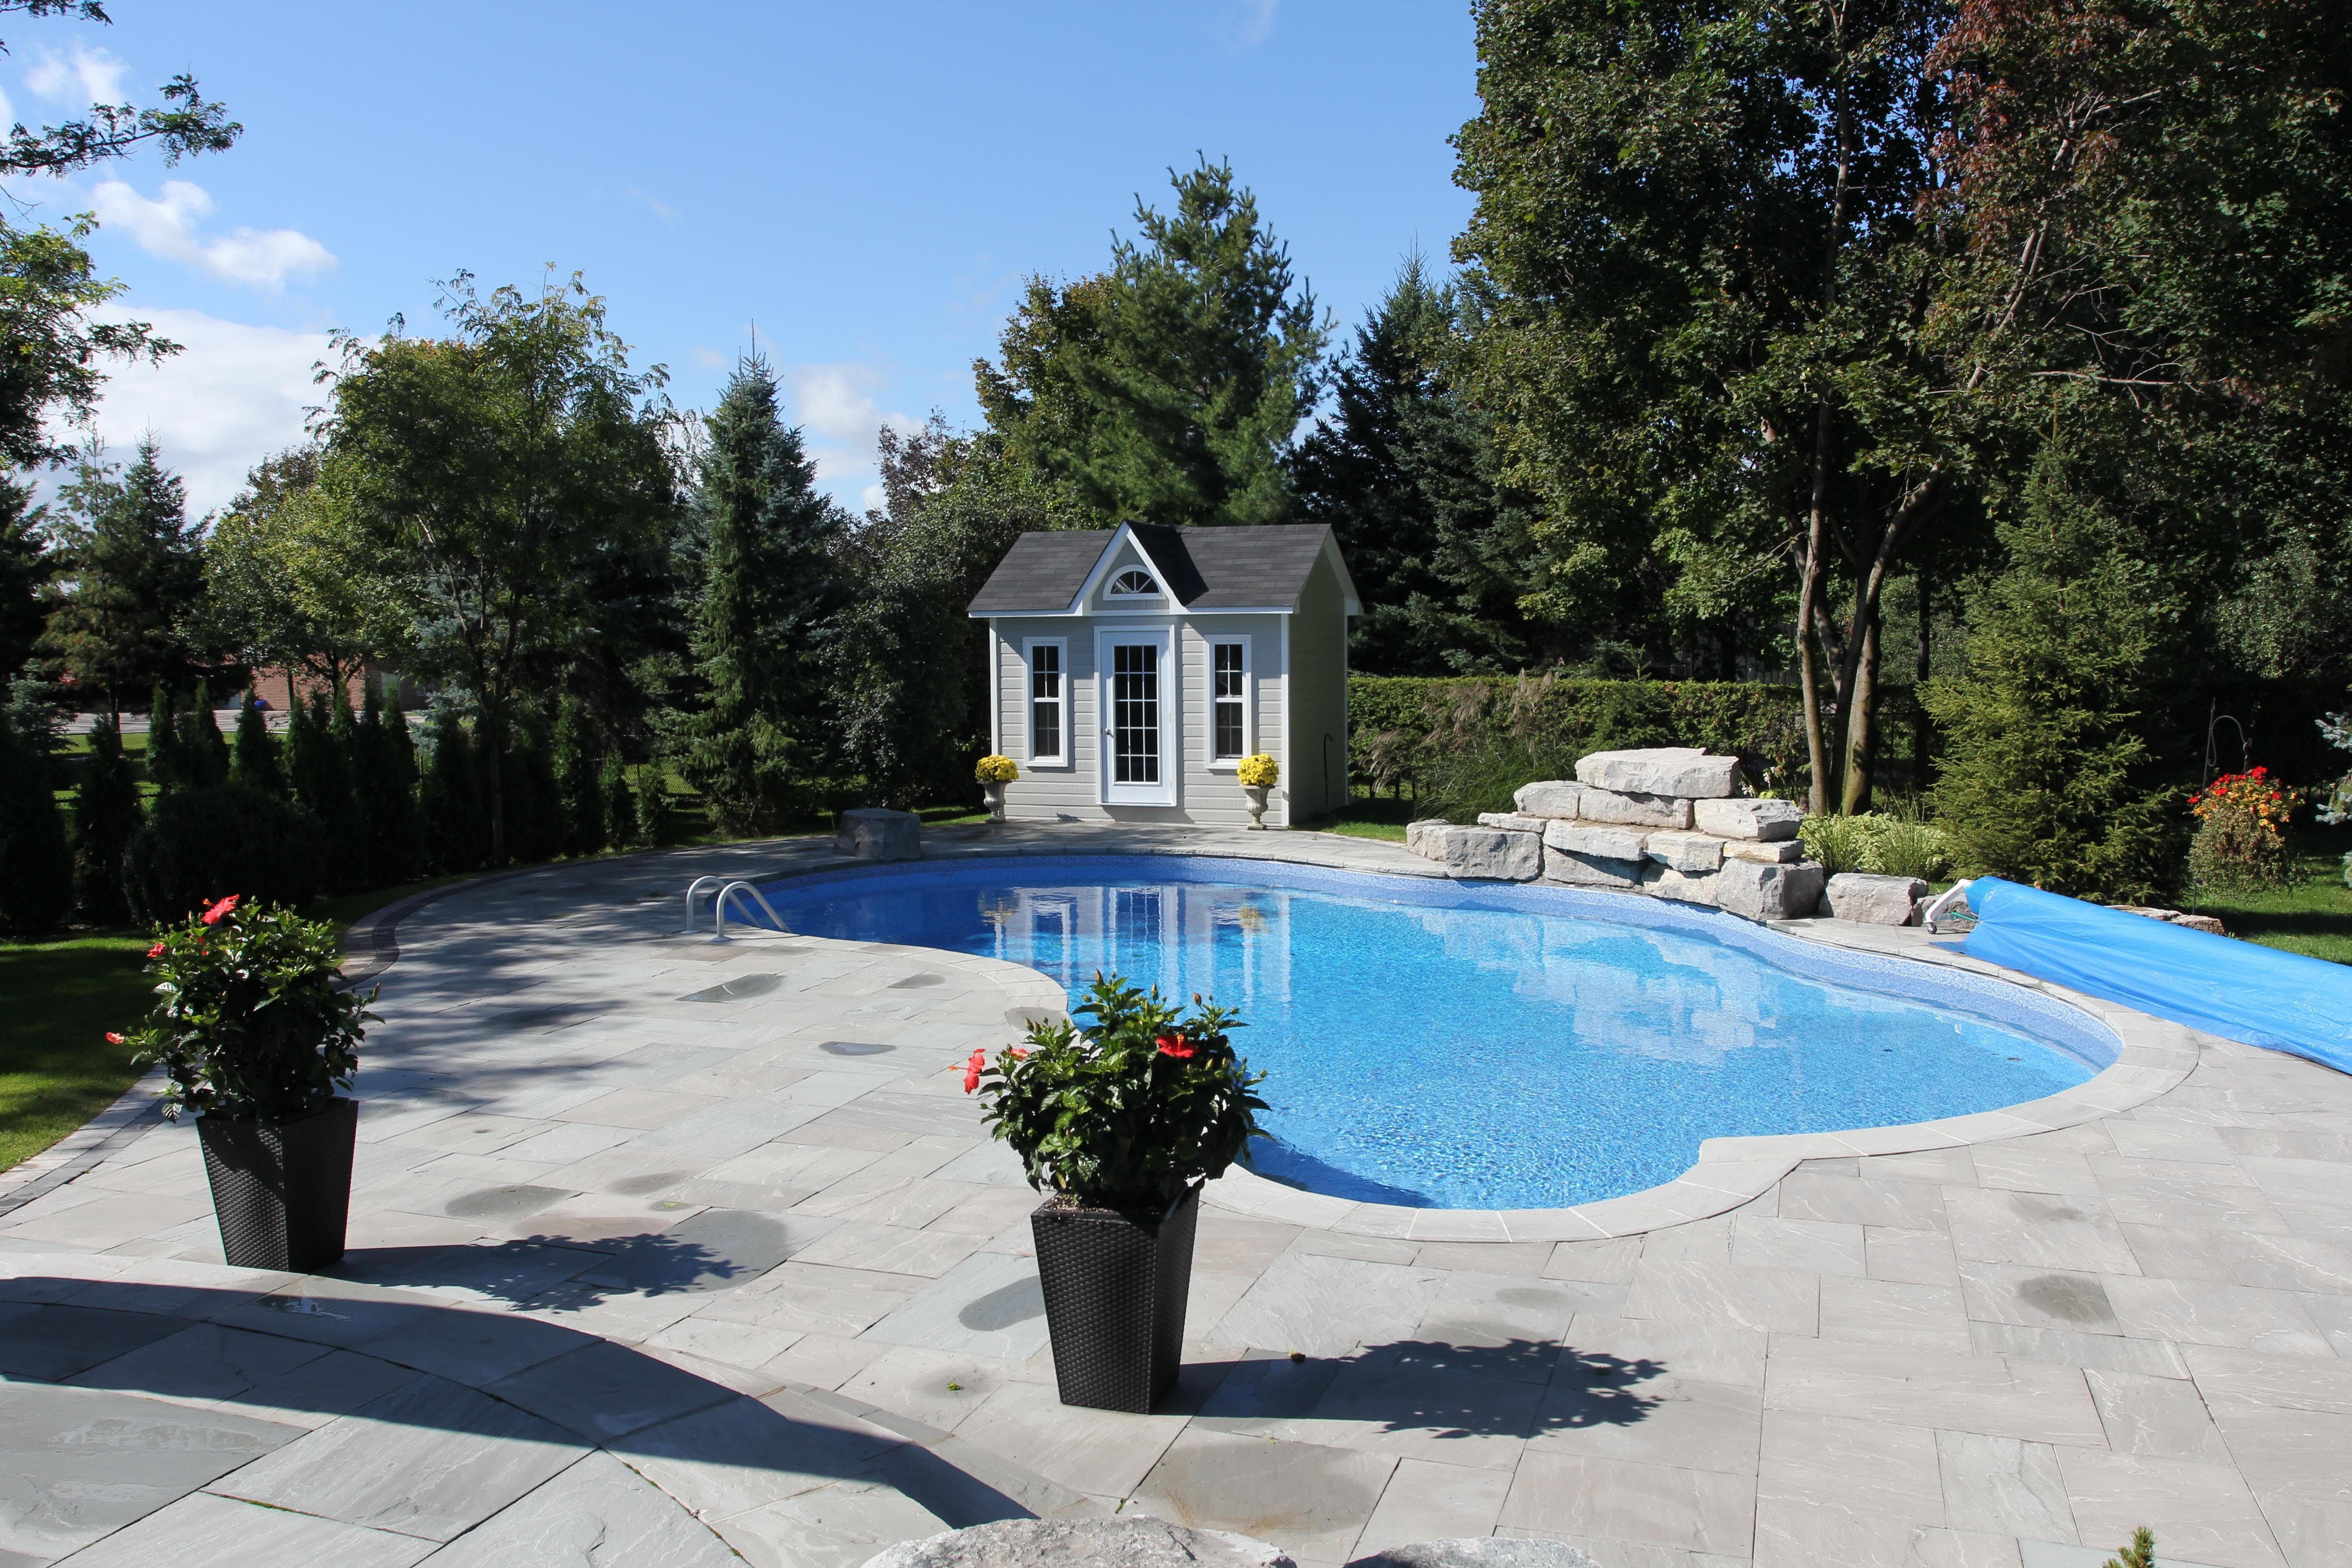 Copper Creek 9x12 pool house with roof boards in Richmond Hill Ontario. ID number 181830-3